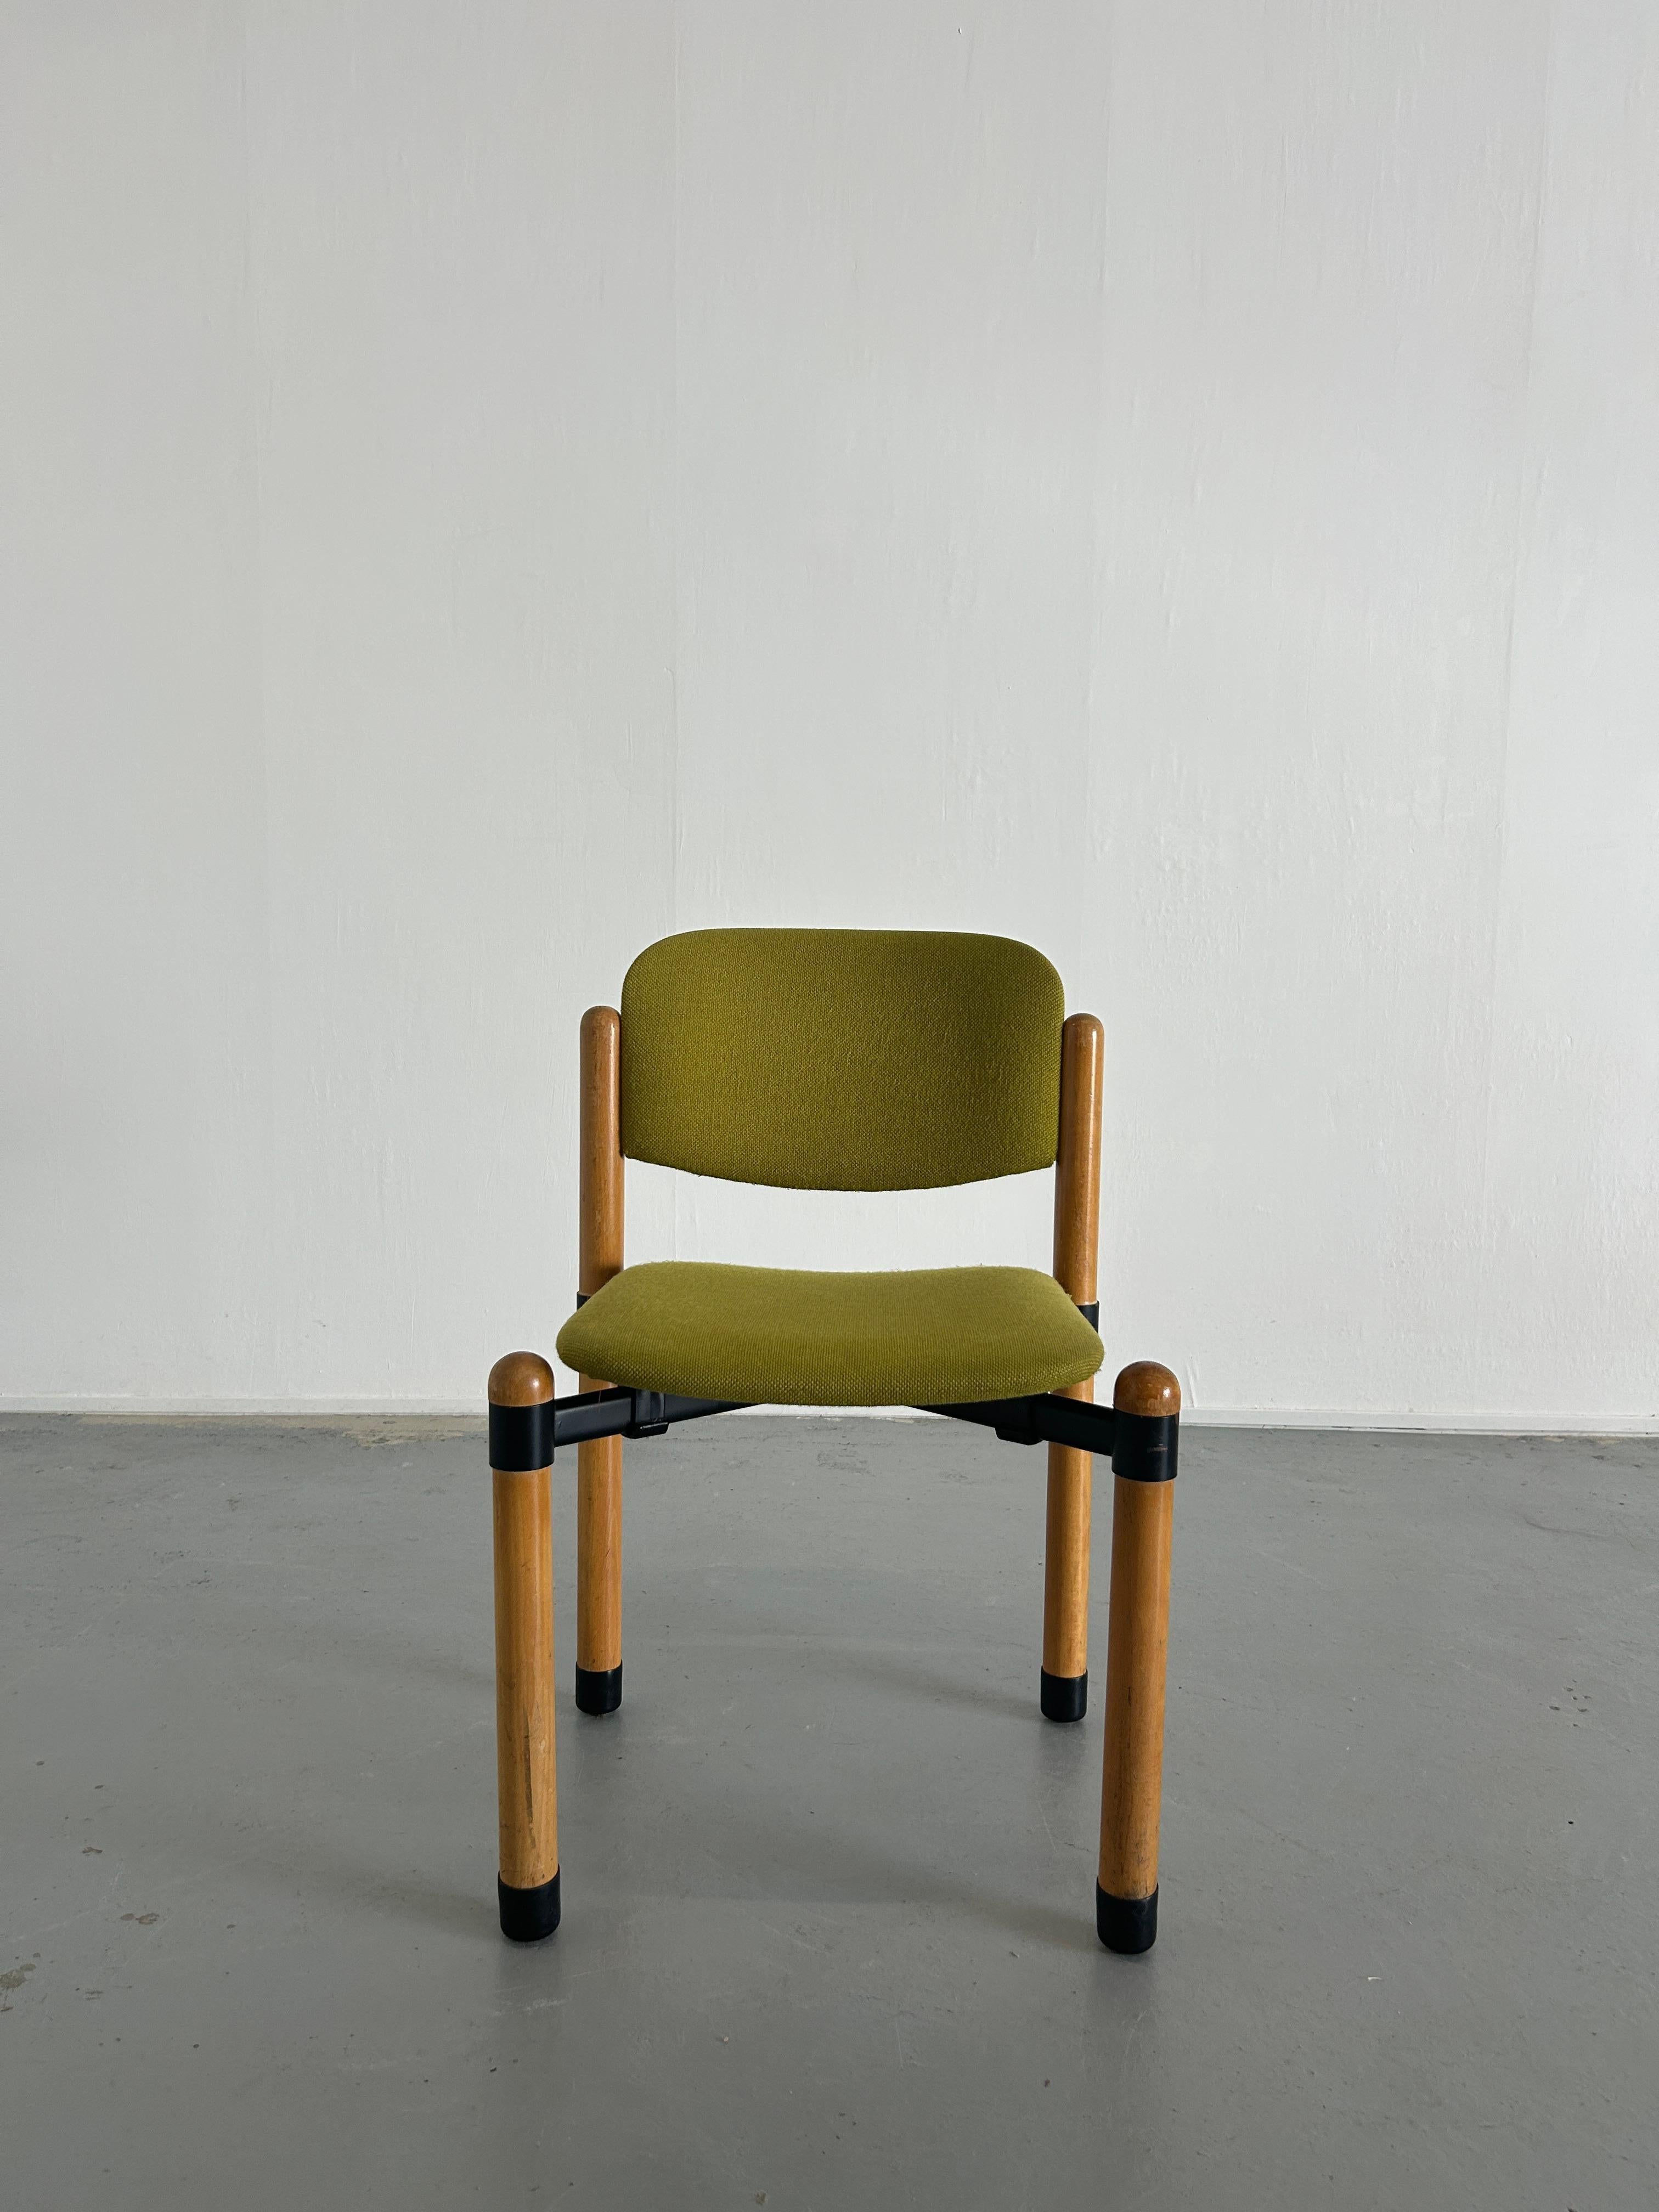 1/10 Mid Century Modern Stackable Dining Chairs by Fröscher Sitform, 70s Germany 1